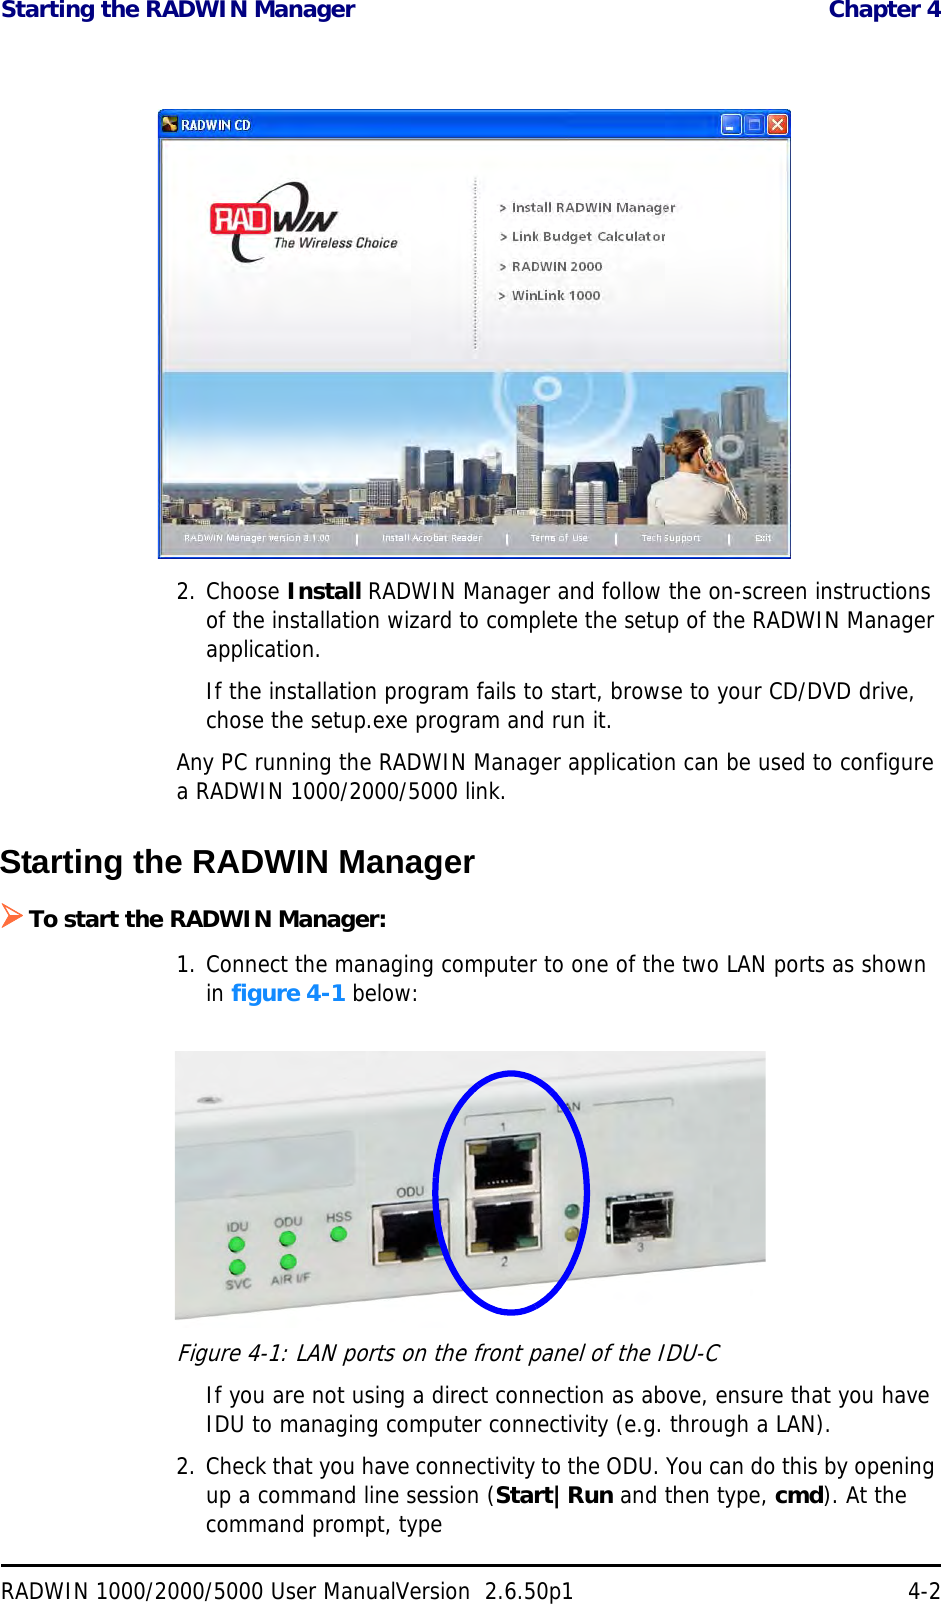 Starting the RADWIN Manager  Chapter 4RADWIN 1000/2000/5000 User ManualVersion  2.6.50p1 4-22. Choose Install RADWIN Manager and follow the on-screen instructions of the installation wizard to complete the setup of the RADWIN Manager application.If the installation program fails to start, browse to your CD/DVD drive, chose the setup.exe program and run it.Any PC running the RADWIN Manager application can be used to configure a RADWIN 1000/2000/5000 link.Starting the RADWIN Manager To start the RADWIN Manager:1. Connect the managing computer to one of the two LAN ports as shown in figure 4-1 below:Figure 4-1: LAN ports on the front panel of the IDU-CIf you are not using a direct connection as above, ensure that you have IDU to managing computer connectivity (e.g. through a LAN).2. Check that you have connectivity to the ODU. You can do this by opening up a command line session (Start|Run and then type, cmd). At the command prompt, type